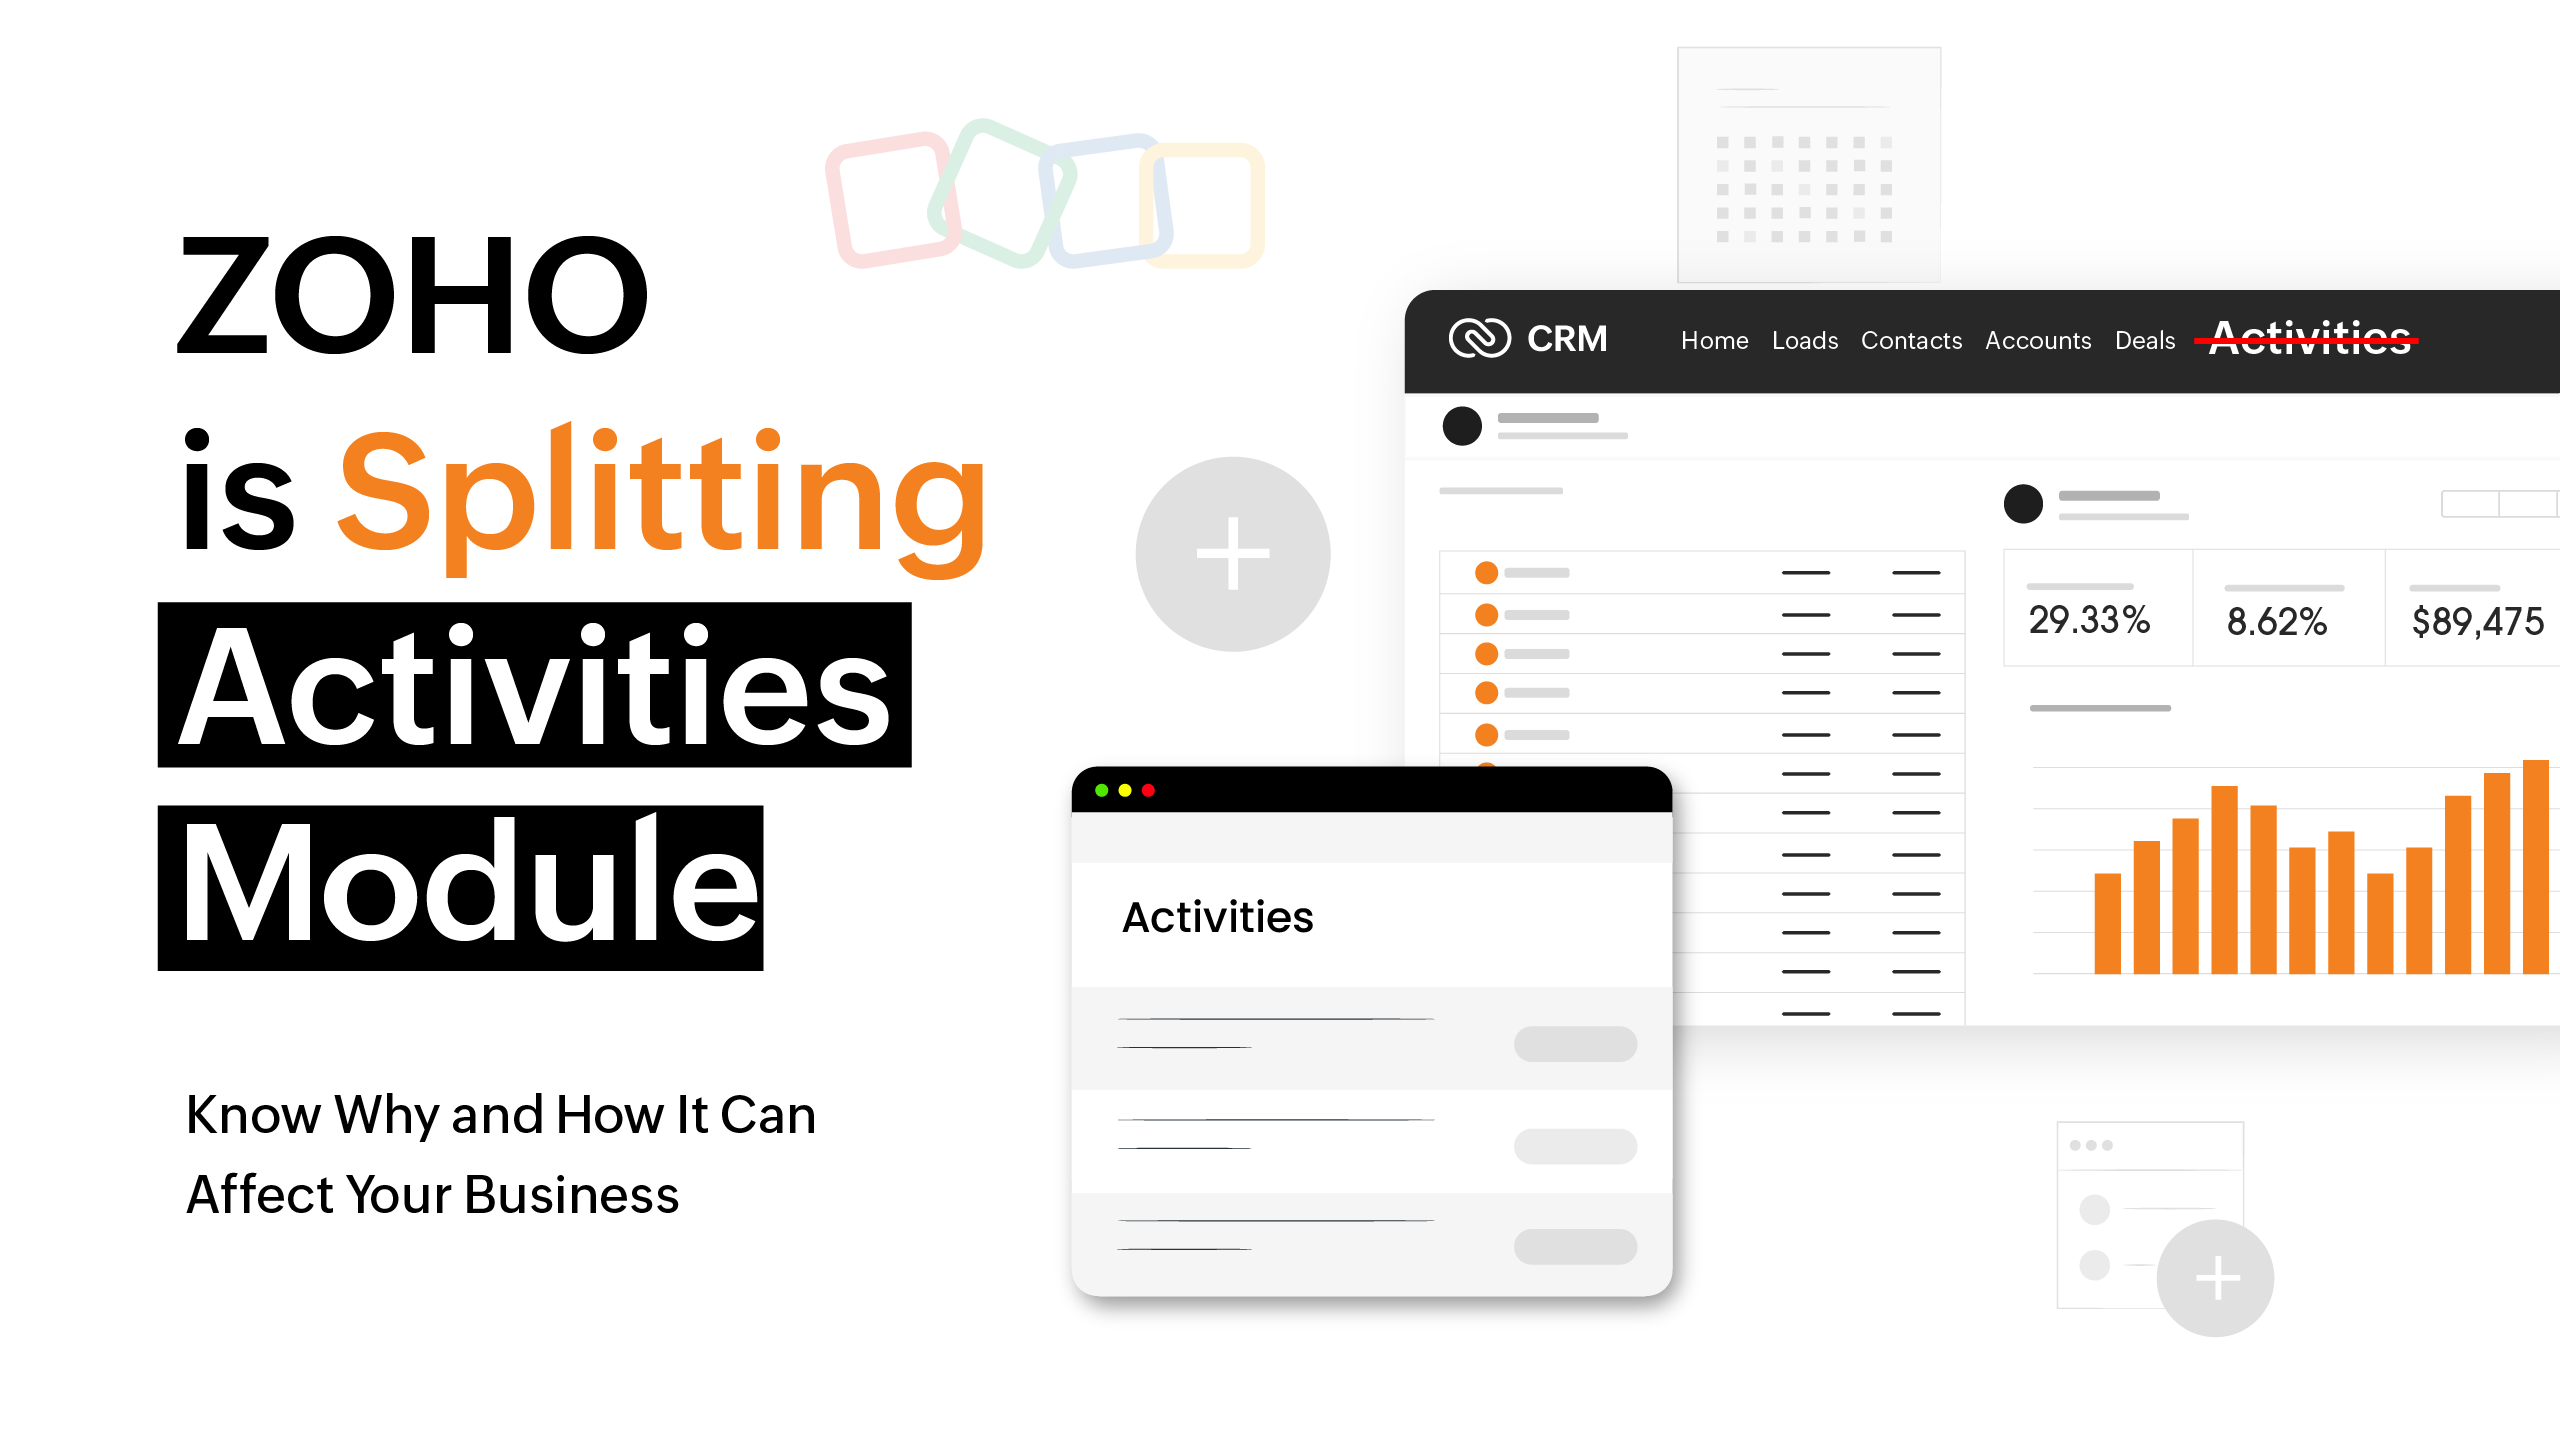 Zoho is Splitting Activities Module: Know Why and How It Can Affect Your Business